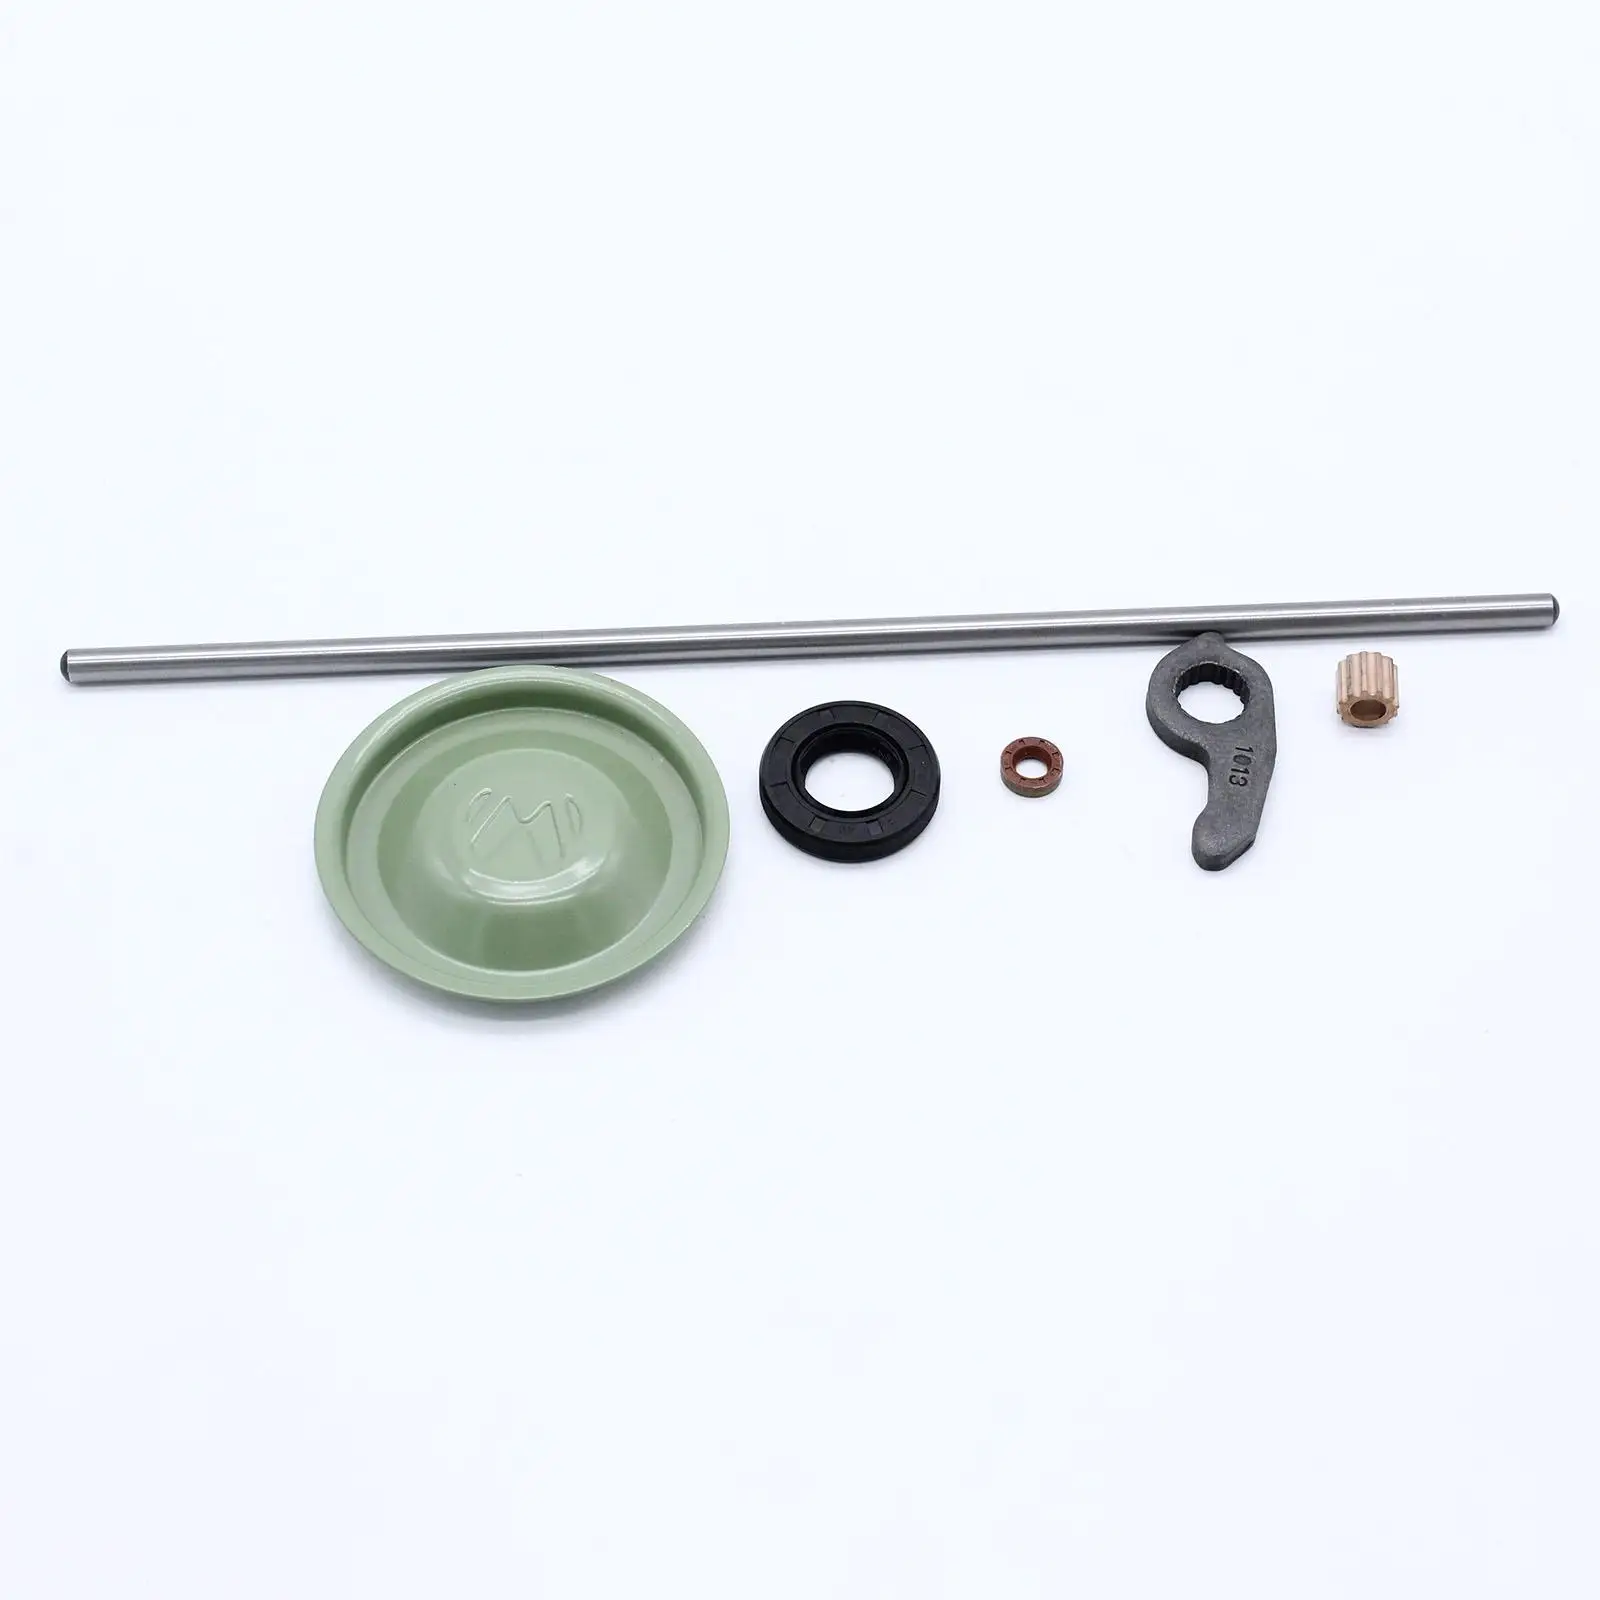 Clutch Release Green Bearing Caps Kits 02K141709A Clutch Pushrod Lever Kit Fit for Golf MK1 MK2 Replacement Easy to Install